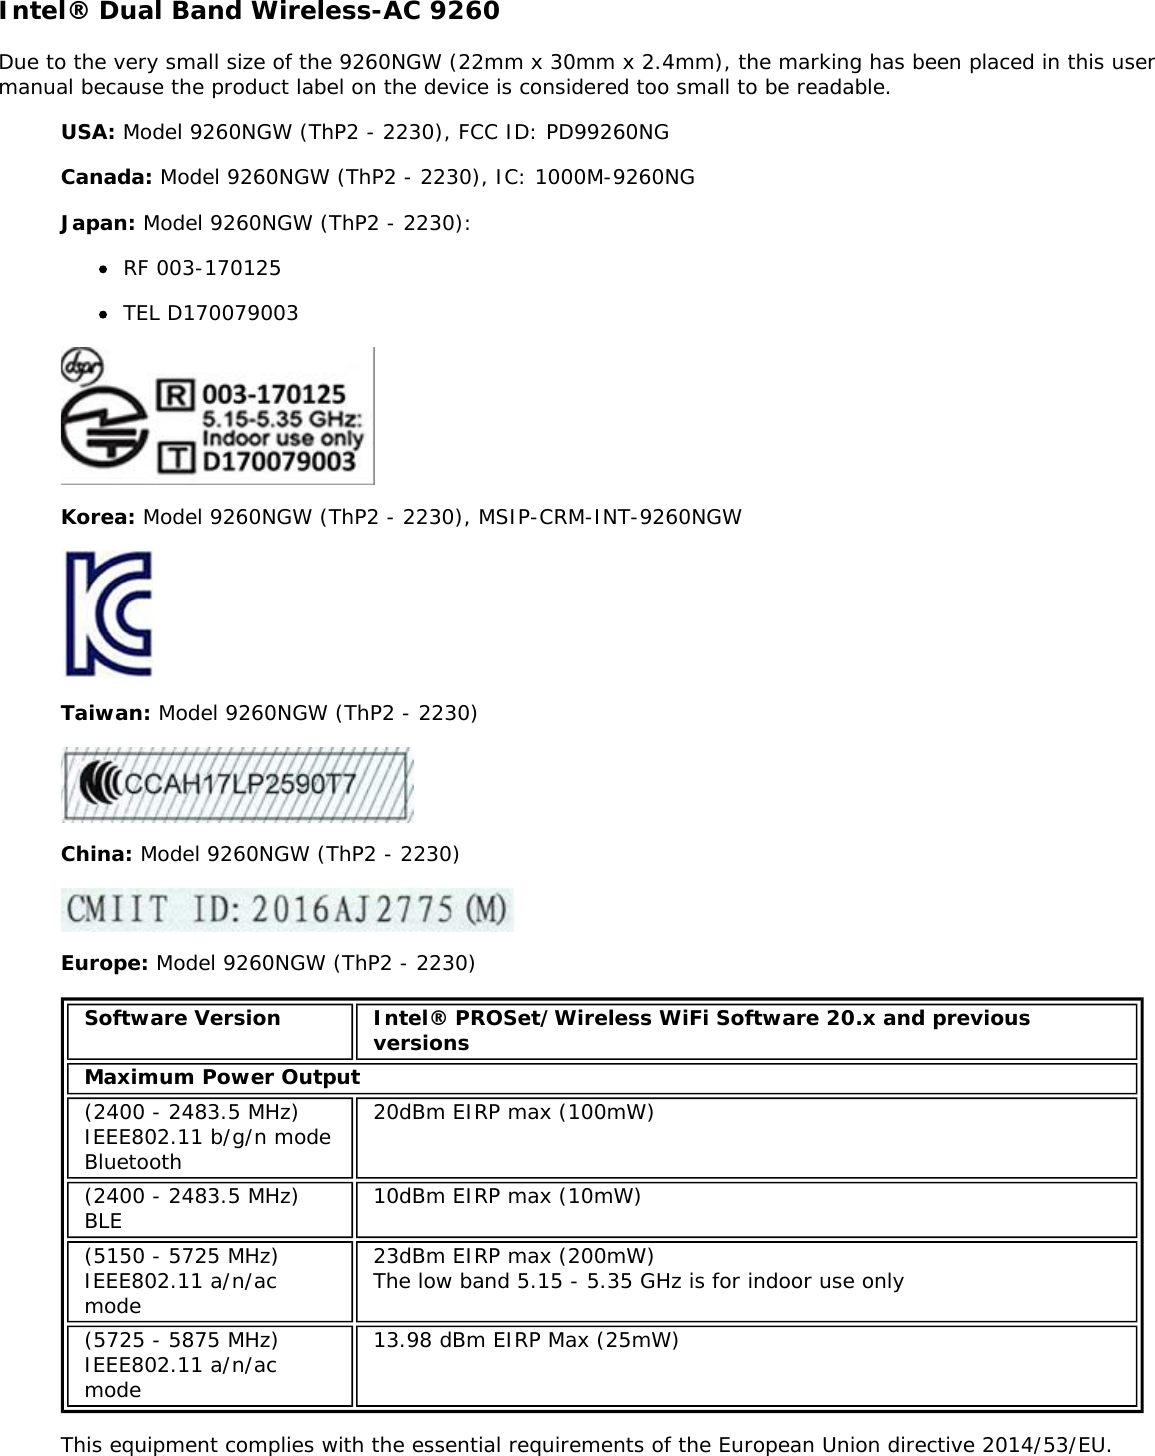 Intel® Dual Band Wireless-AC 9260Due to the very small size of the 9260NGW (22mm x 30mm x 2.4mm), the marking has been placed in this usermanual because the product label on the device is considered too small to be readable.USA: Model 9260NGW (ThP2 - 2230), FCC ID: PD99260NGCanada: Model 9260NGW (ThP2 - 2230), IC: 1000M-9260NGJapan: Model 9260NGW (ThP2 - 2230):RF 003-170125TEL D170079003Korea: Model 9260NGW (ThP2 - 2230), MSIP-CRM-INT-9260NGWTaiwan: Model 9260NGW (ThP2 - 2230)China: Model 9260NGW (ThP2 - 2230)Europe: Model 9260NGW (ThP2 - 2230)Software Version Intel® PROSet/Wireless WiFi Software 20.x and previousversionsMaximum Power Output(2400 - 2483.5 MHz)IEEE802.11 b/g/n modeBluetooth20dBm EIRP max (100mW)(2400 - 2483.5 MHz)BLE 10dBm EIRP max (10mW)(5150 - 5725 MHz)IEEE802.11 a/n/acmode23dBm EIRP max (200mW)The low band 5.15 - 5.35 GHz is for indoor use only(5725 - 5875 MHz)IEEE802.11 a/n/acmode13.98 dBm EIRP Max (25mW)This equipment complies with the essential requirements of the European Union directive 2014/53/EU.